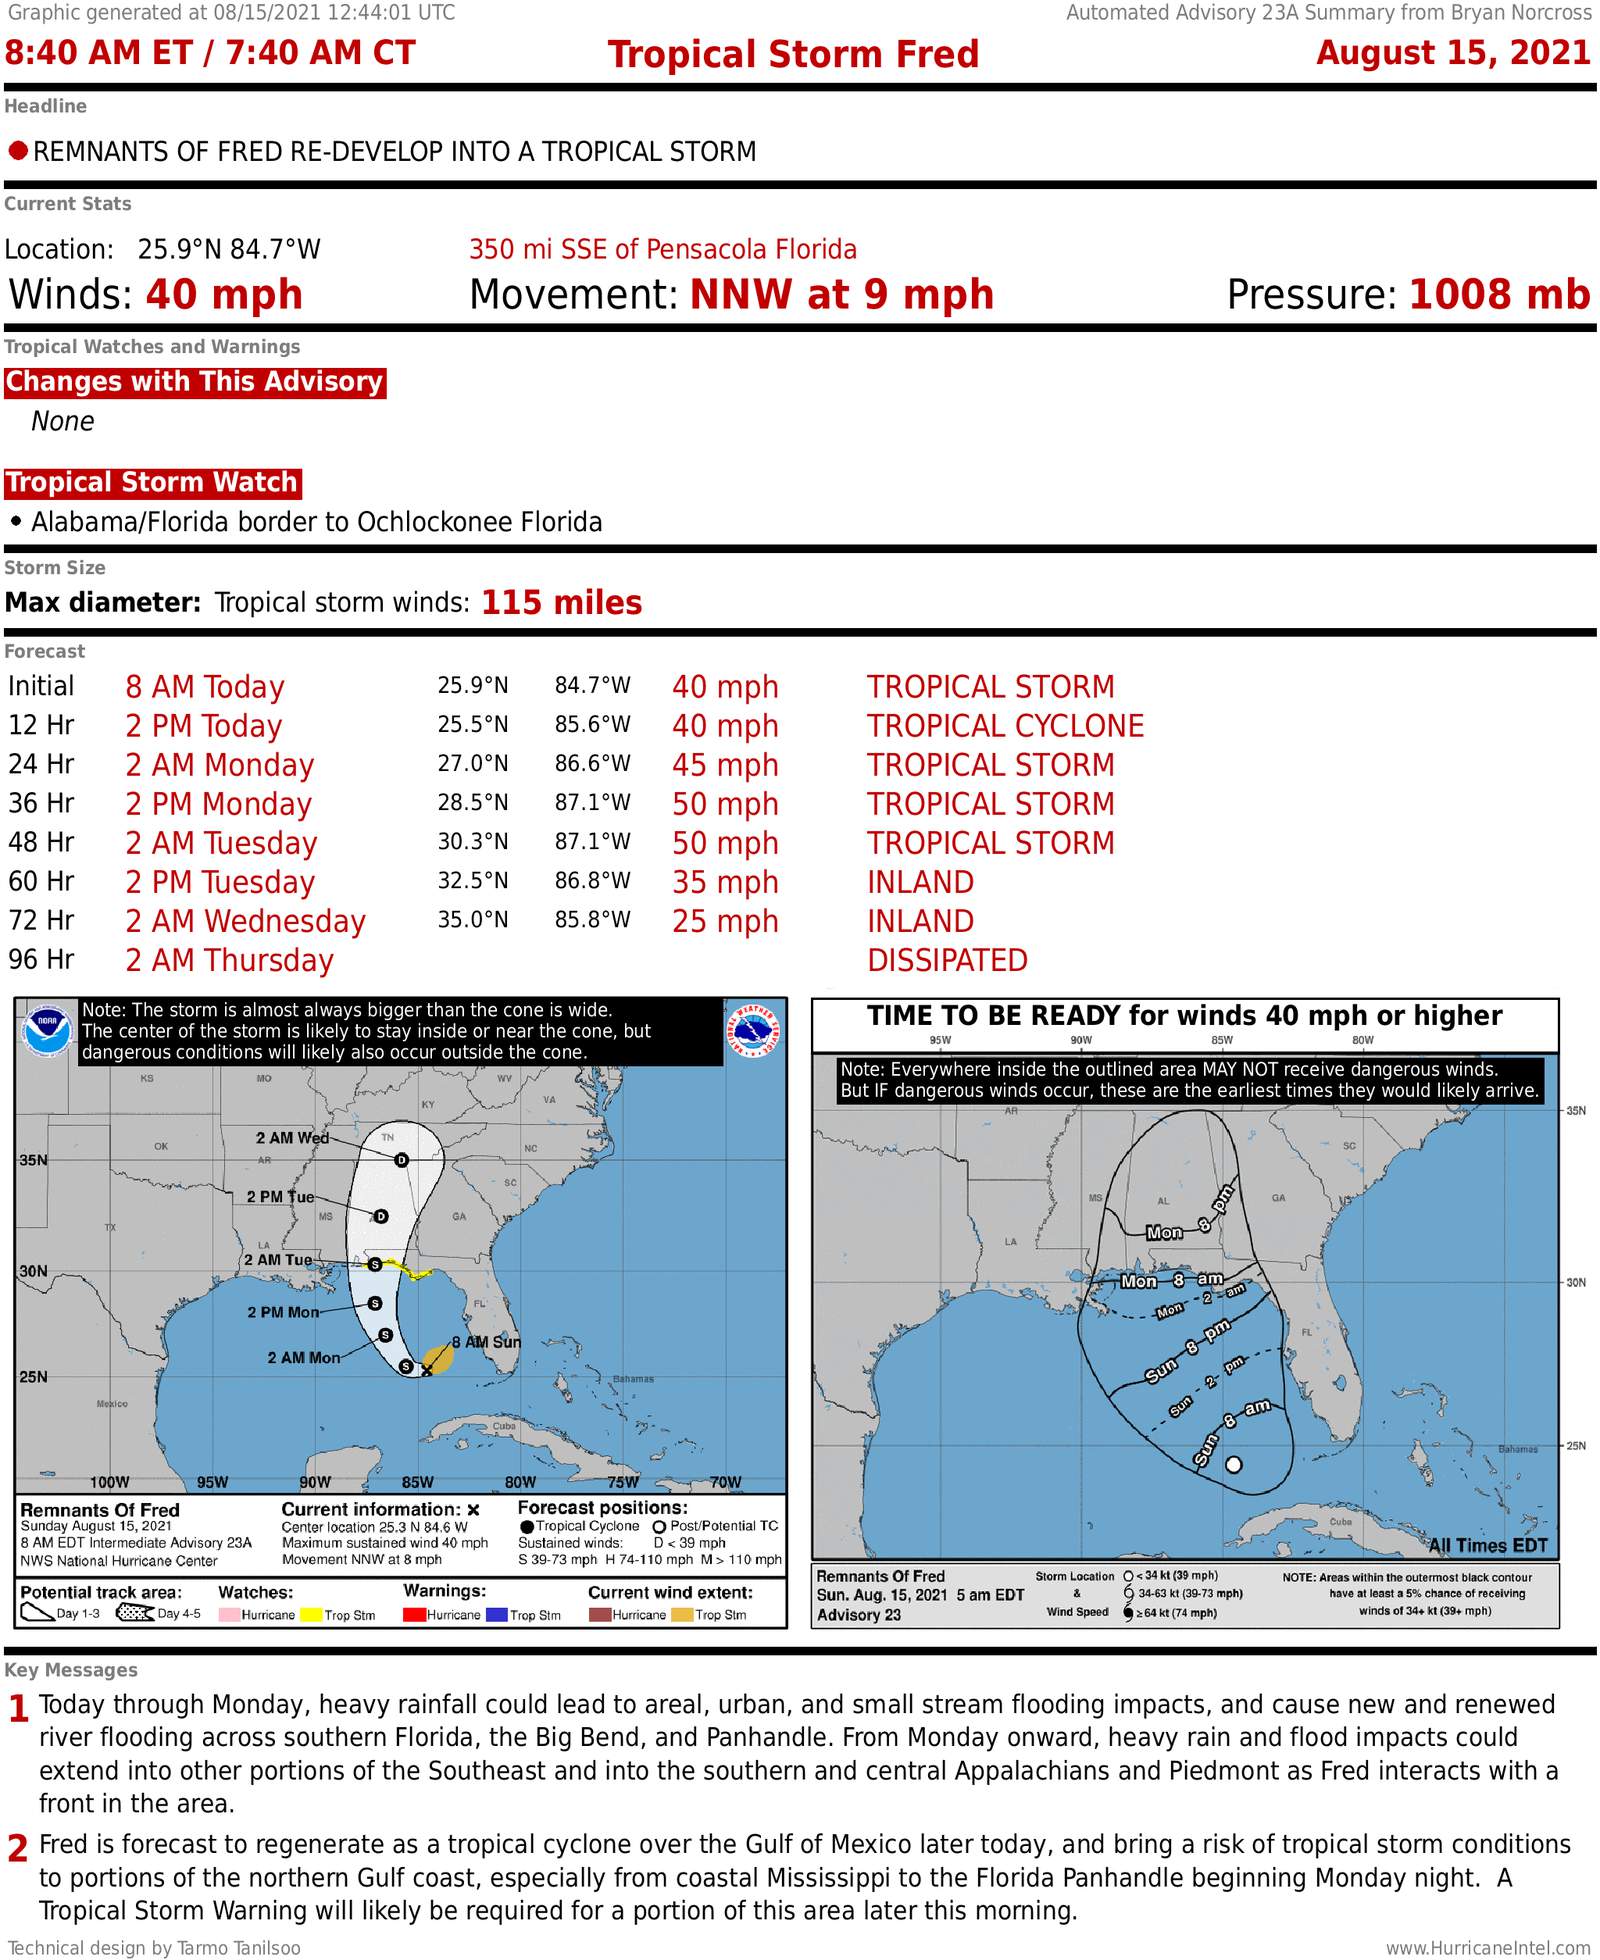 Advisory summary for the remnants of Tropical Depression Fred